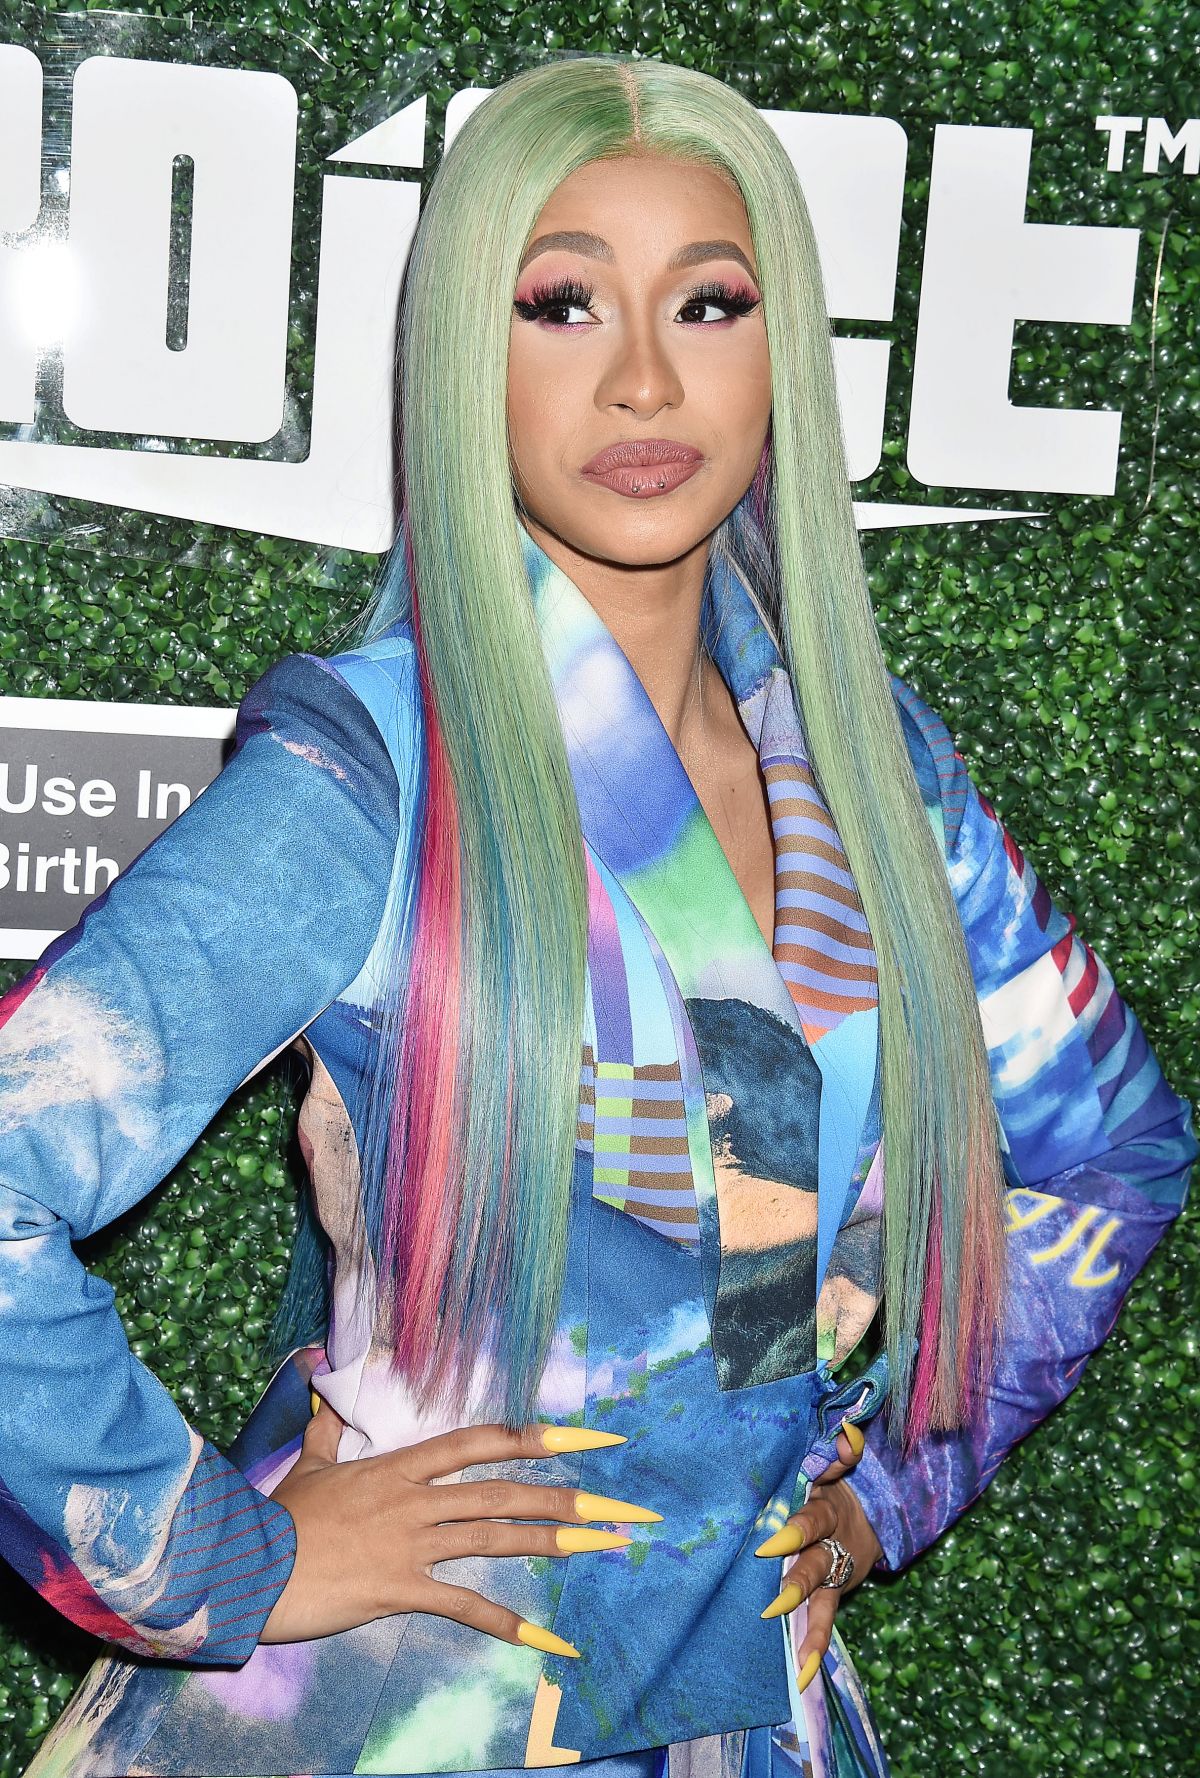 cardi-b-at-swisher-sweets-awards-in-west-hollywood-04-12-2019-12.jpg